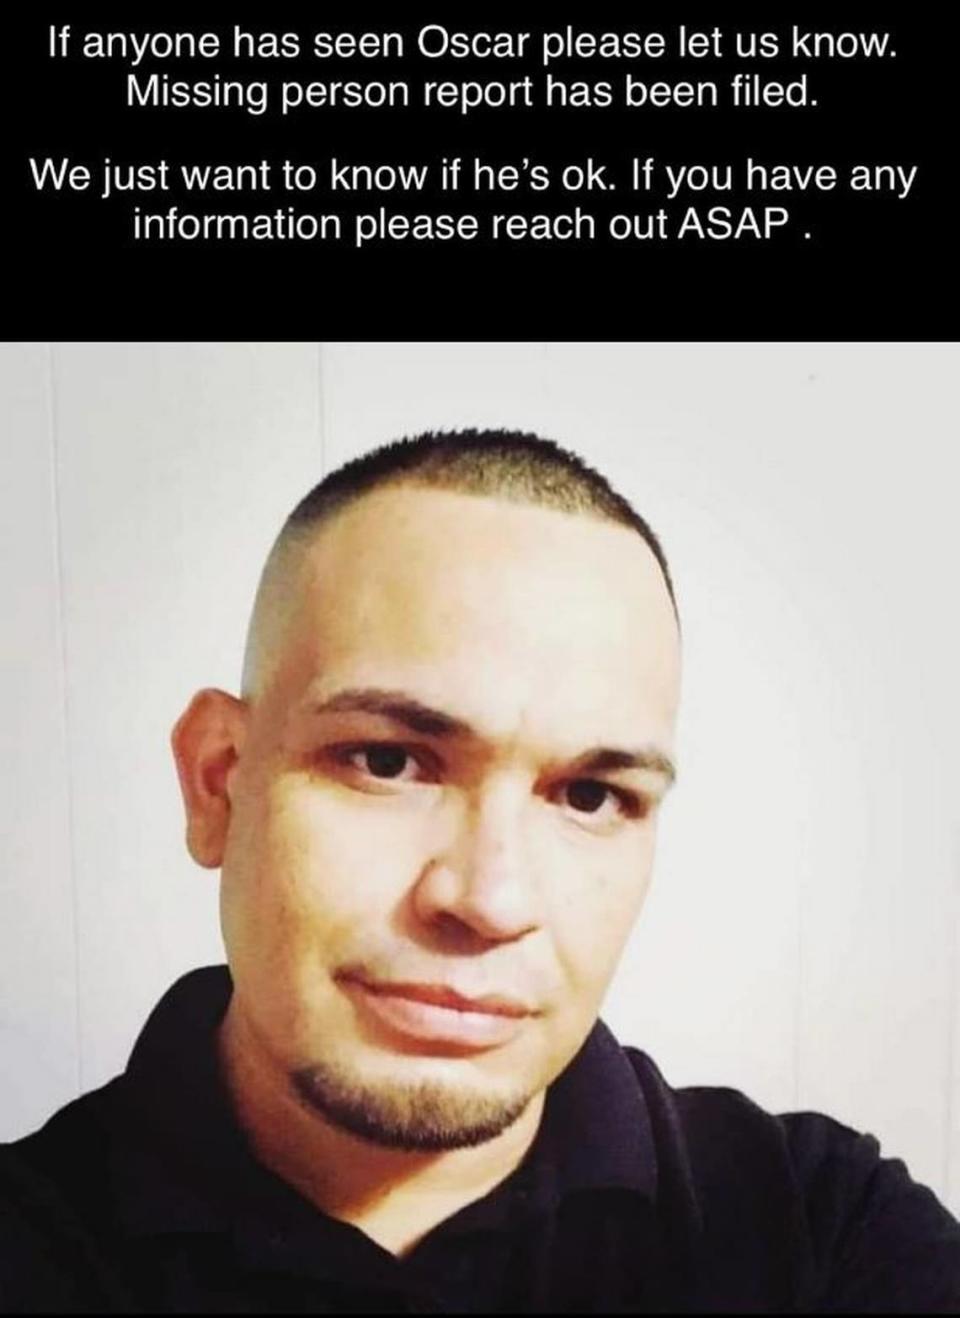 Oscar Munoz’s loved ones posted a plea for help finding him on Facebook in early February.